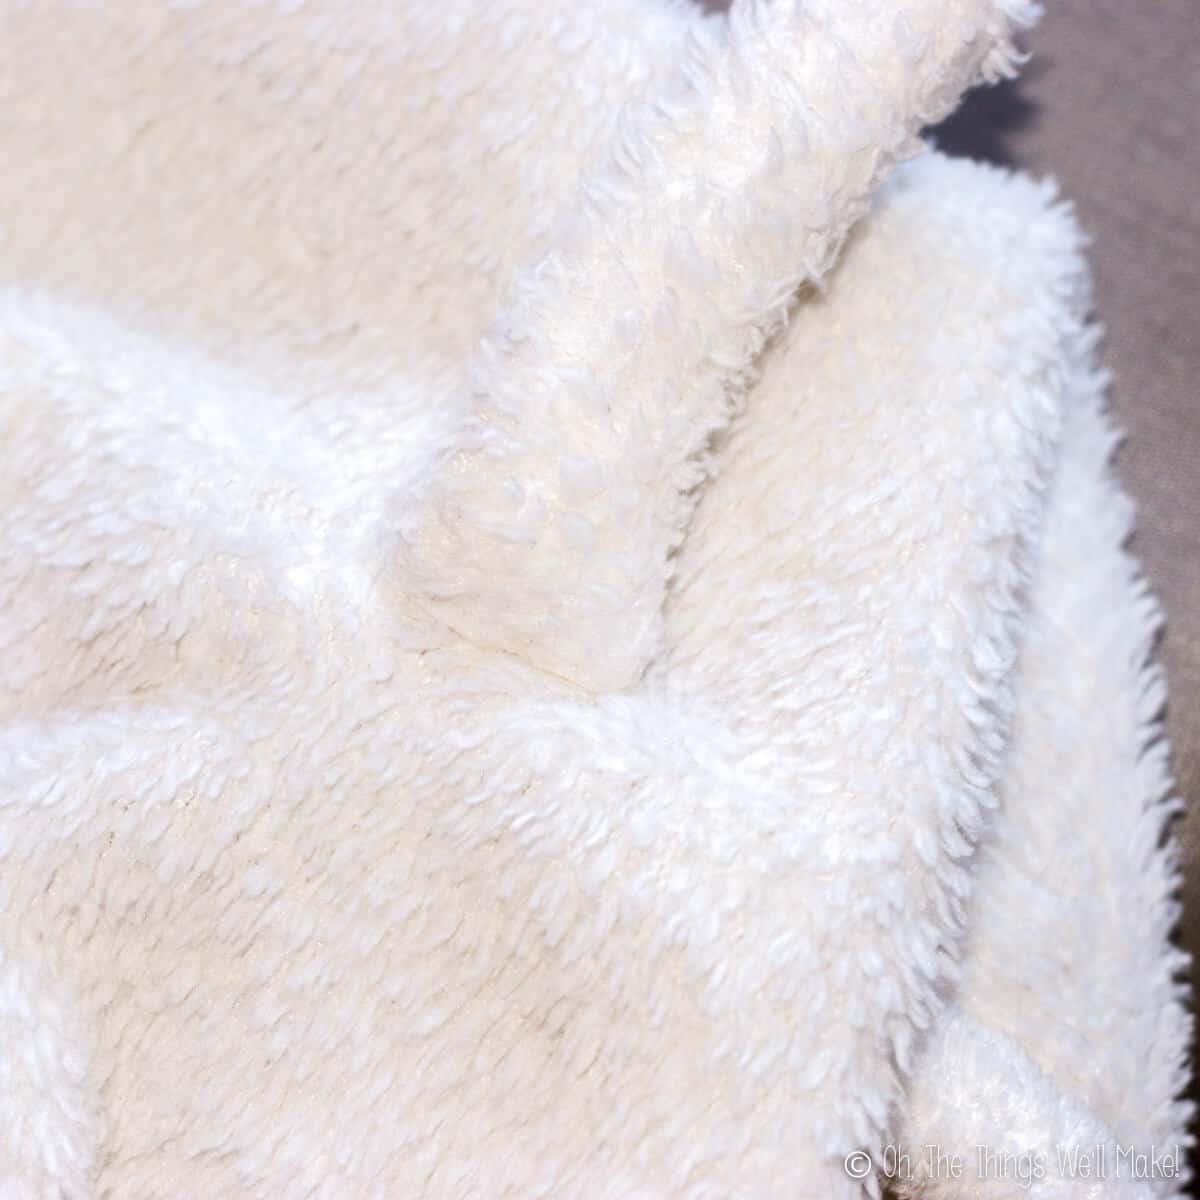 Close up of a tail sewn on a white blanket.